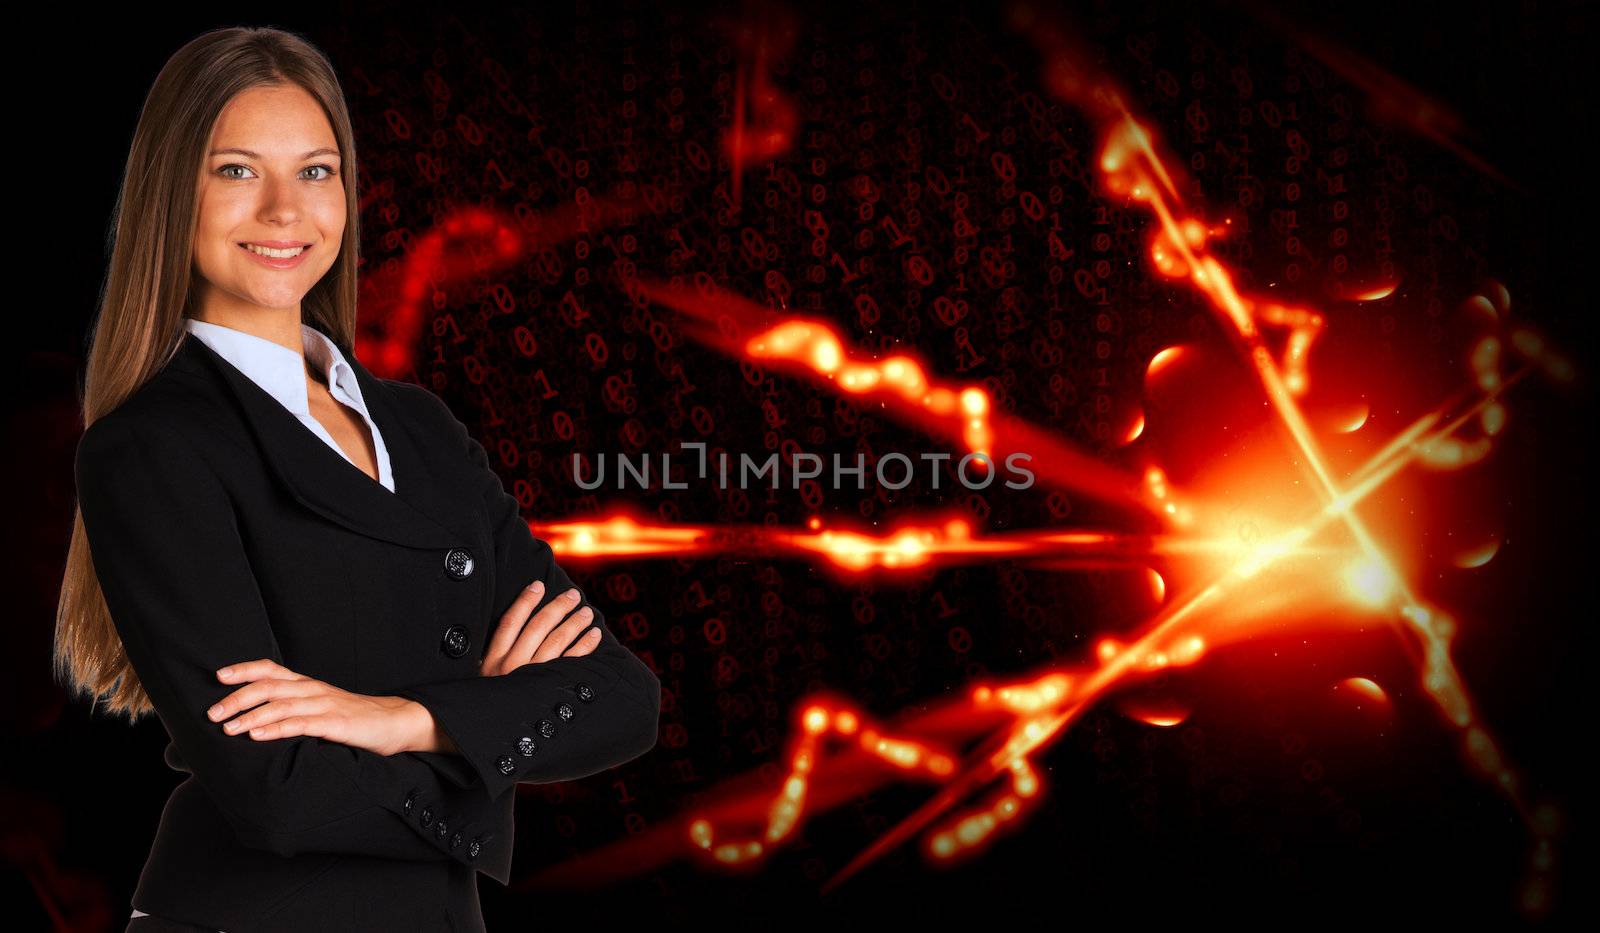 Businesswoman in a suit and glow rays. Business concept